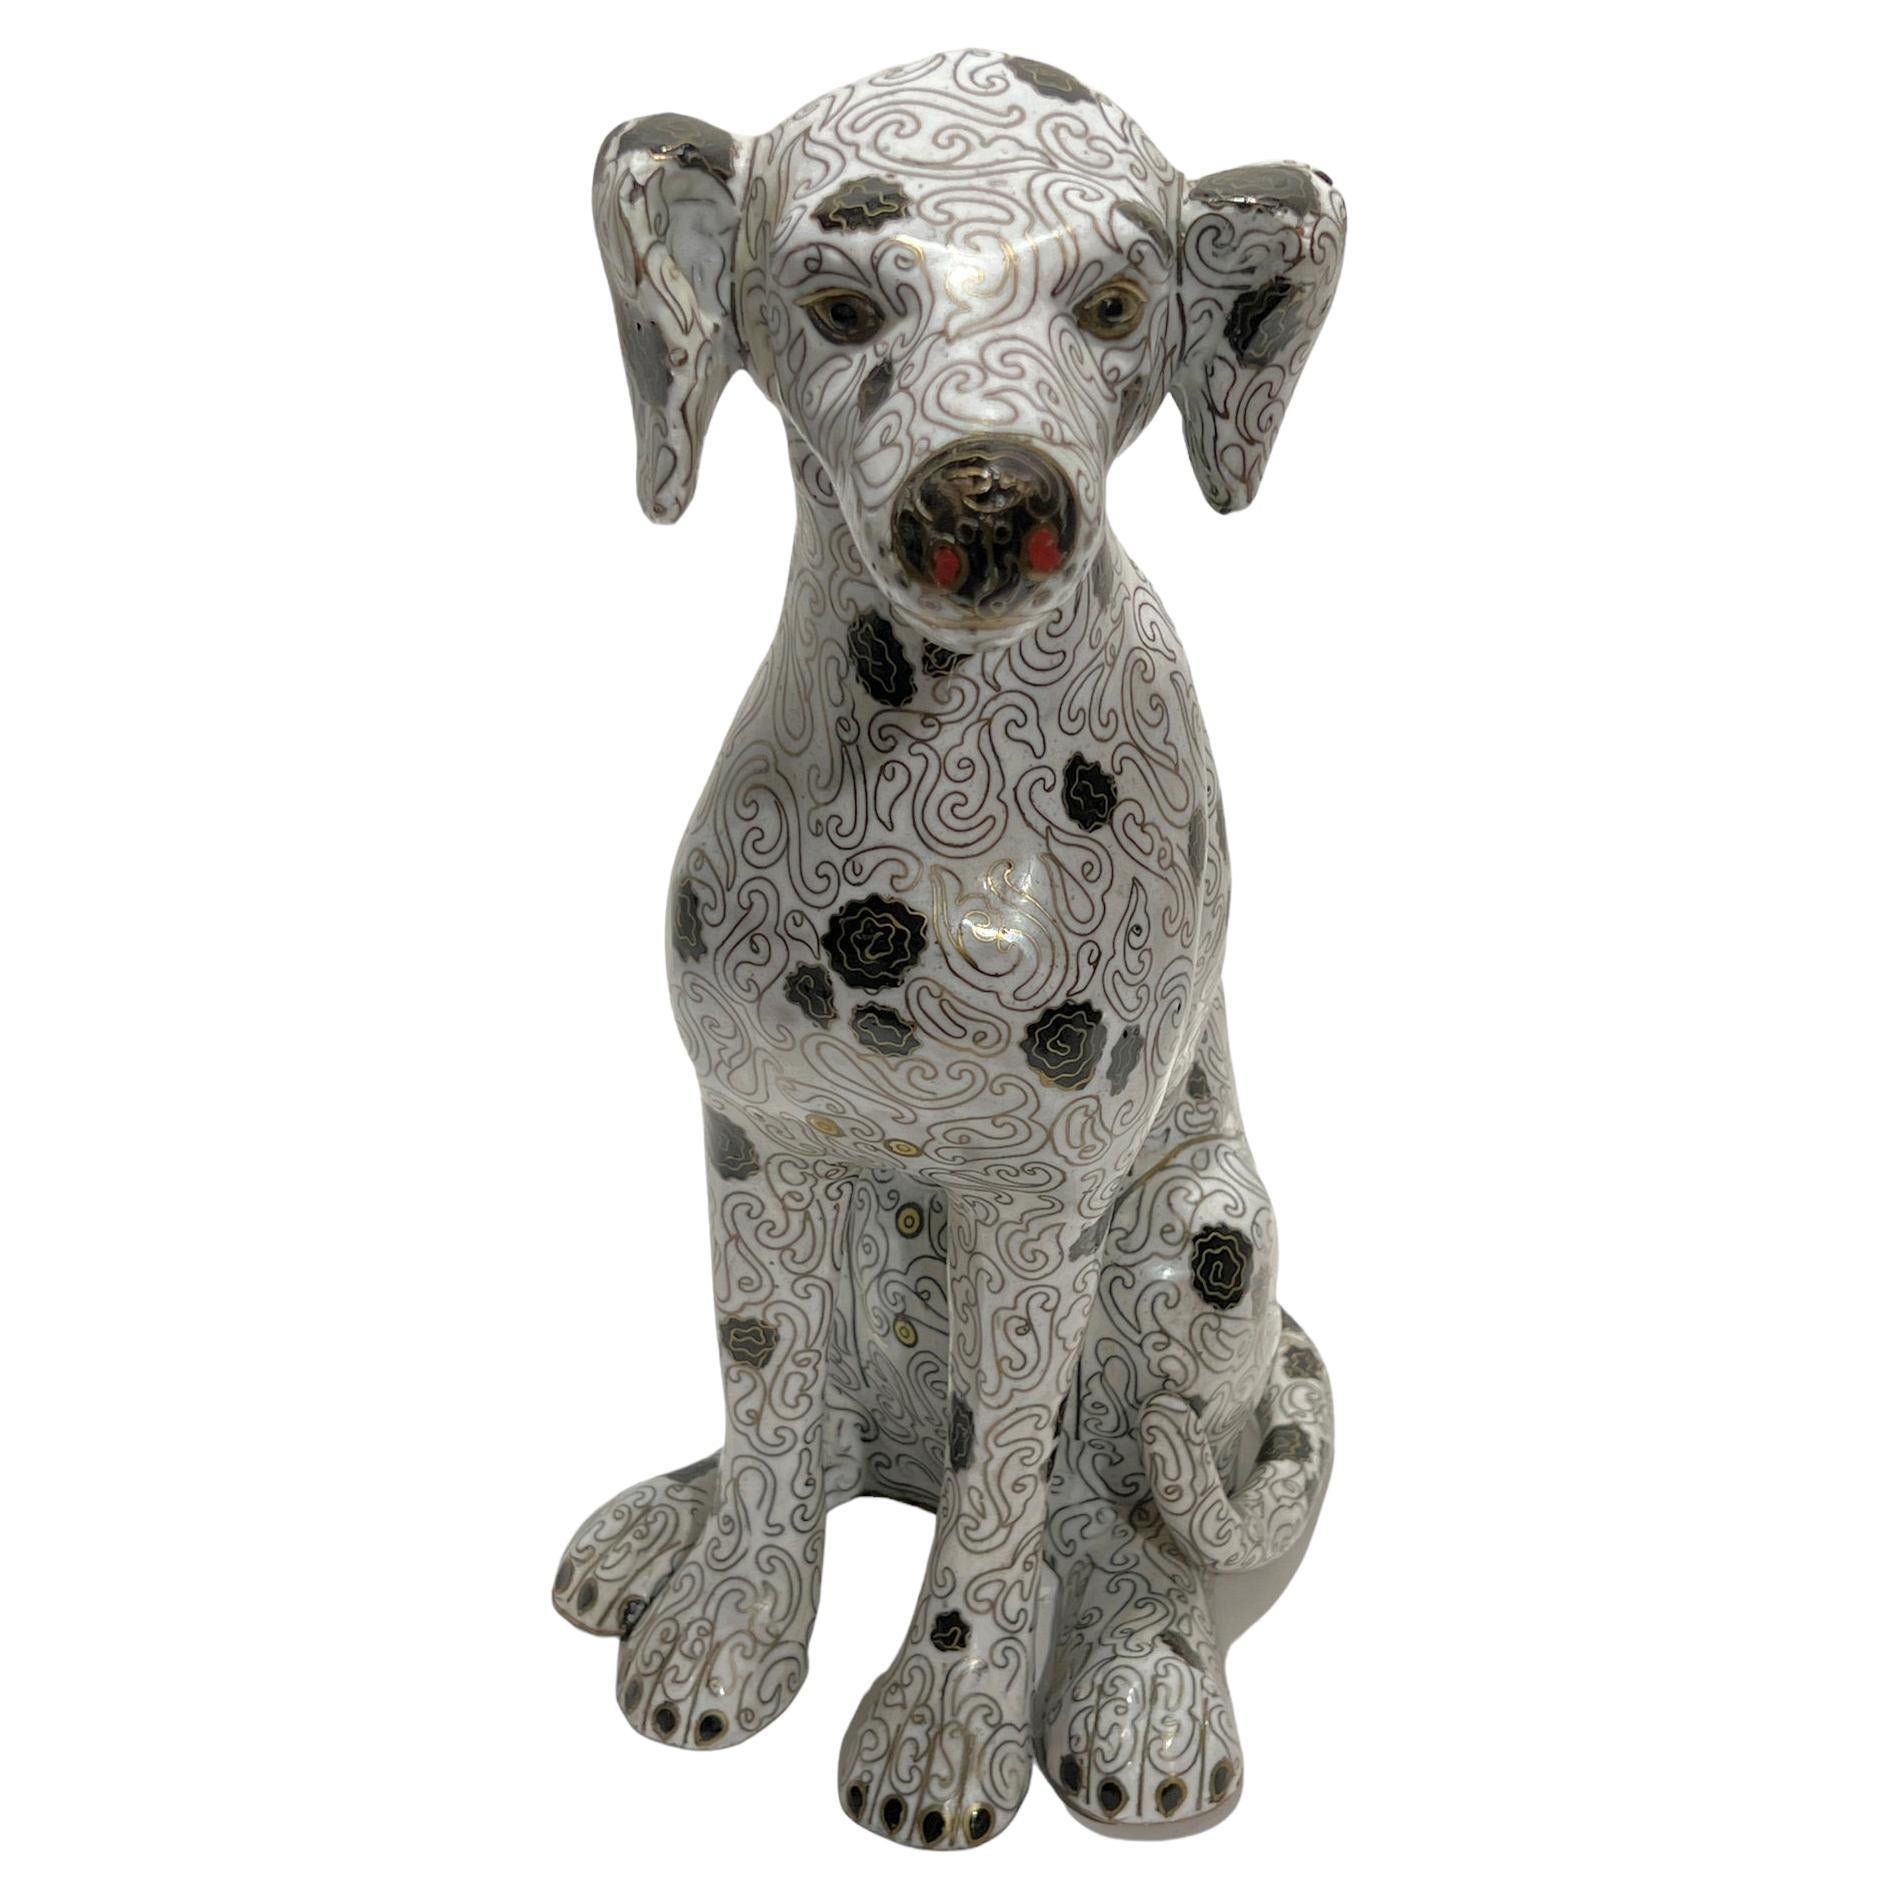 Vintage Chinese Cloisonne Figure of a Seated Dalmatian Puppy For Sale